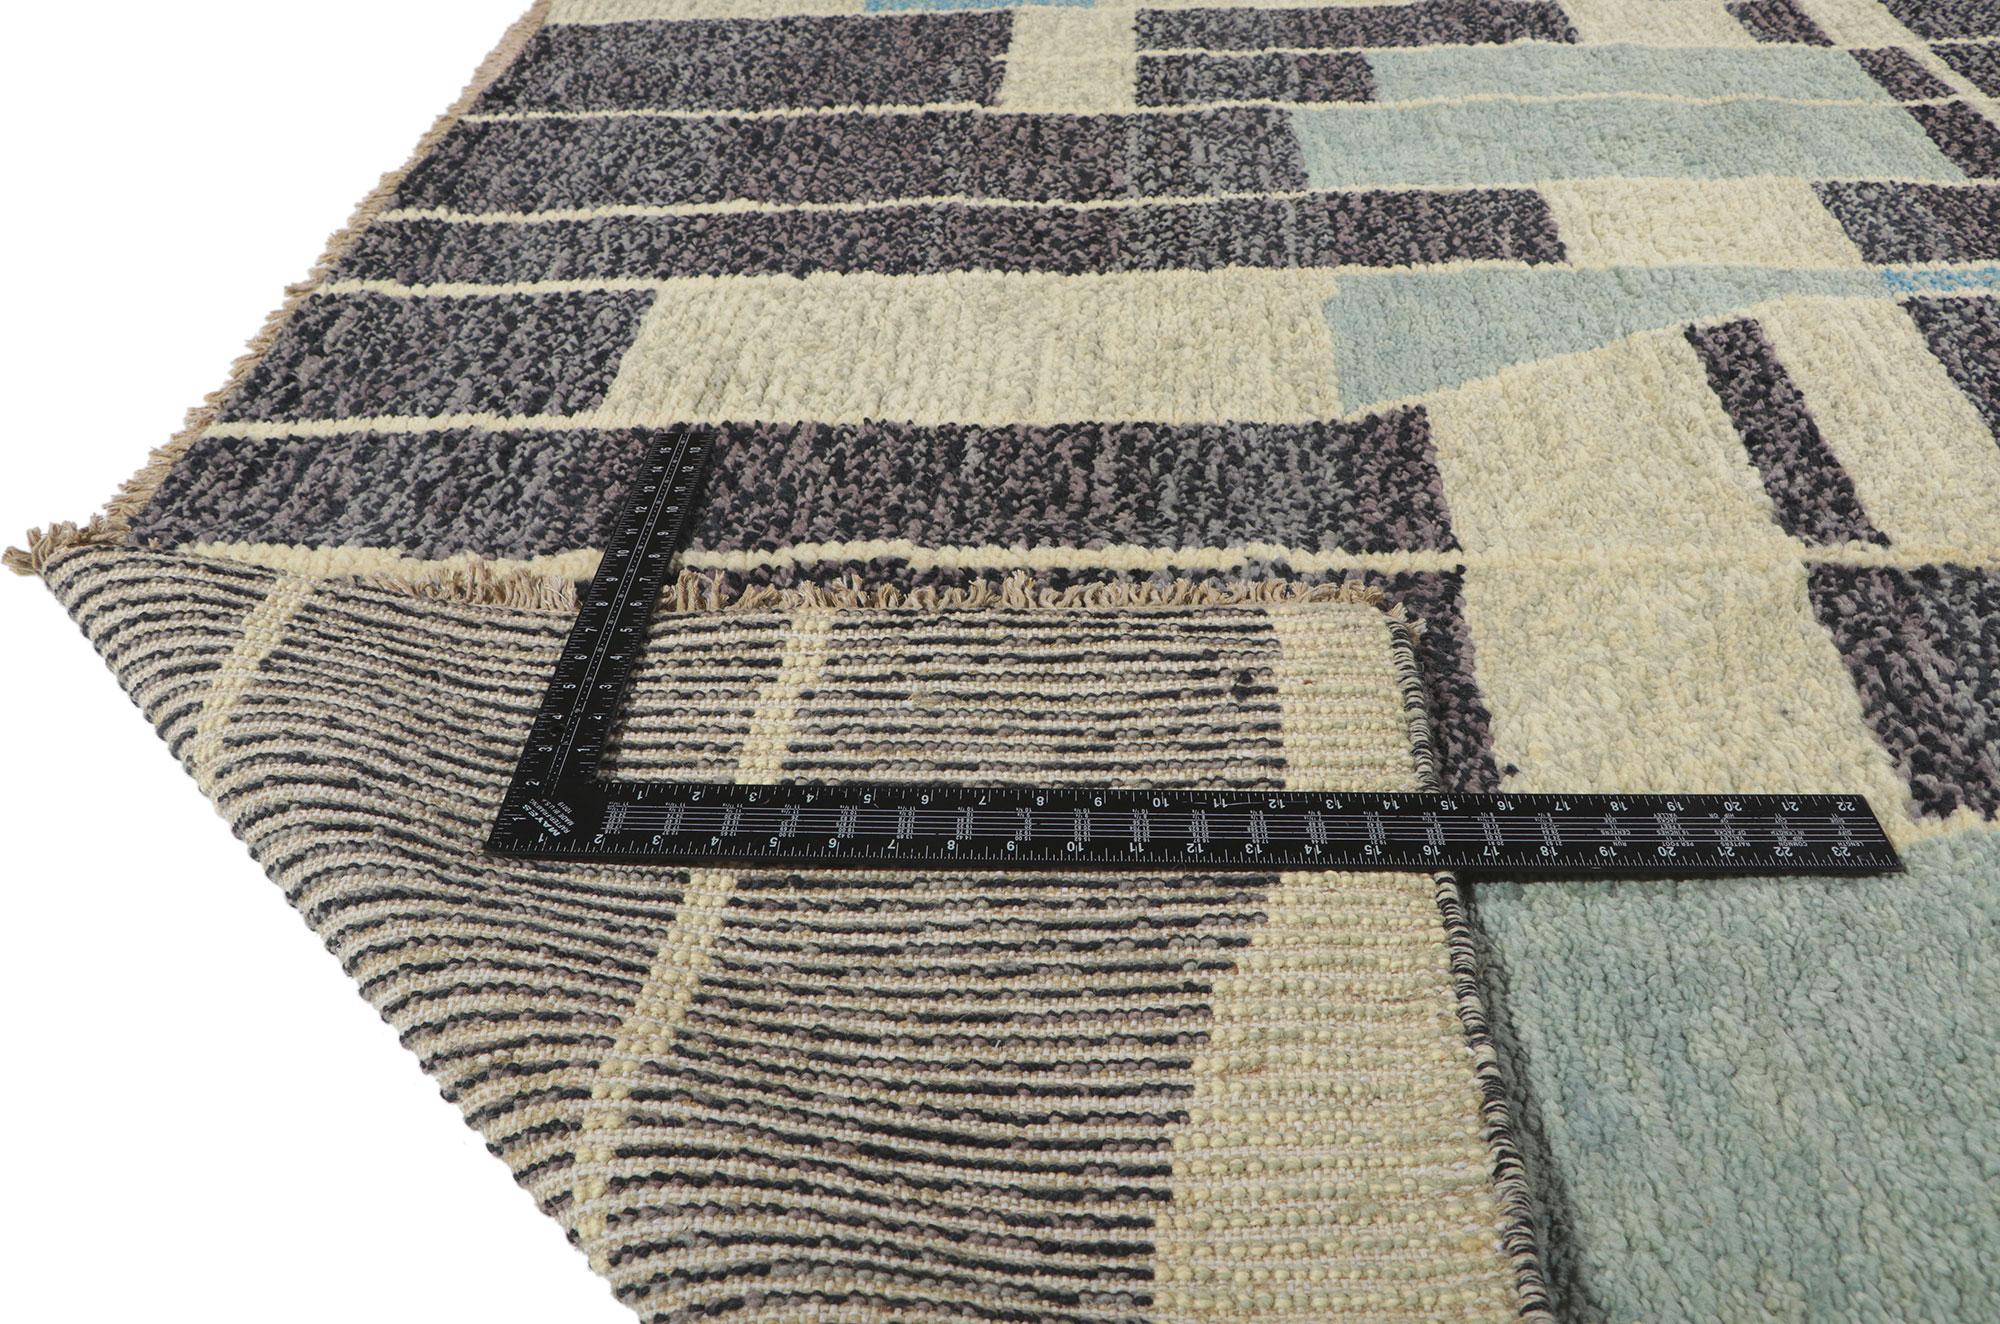 Modern Moroccan Rug Inspired by Gunta Stolzl, Tribal Enchantment Meets Cubism In New Condition For Sale In Dallas, TX